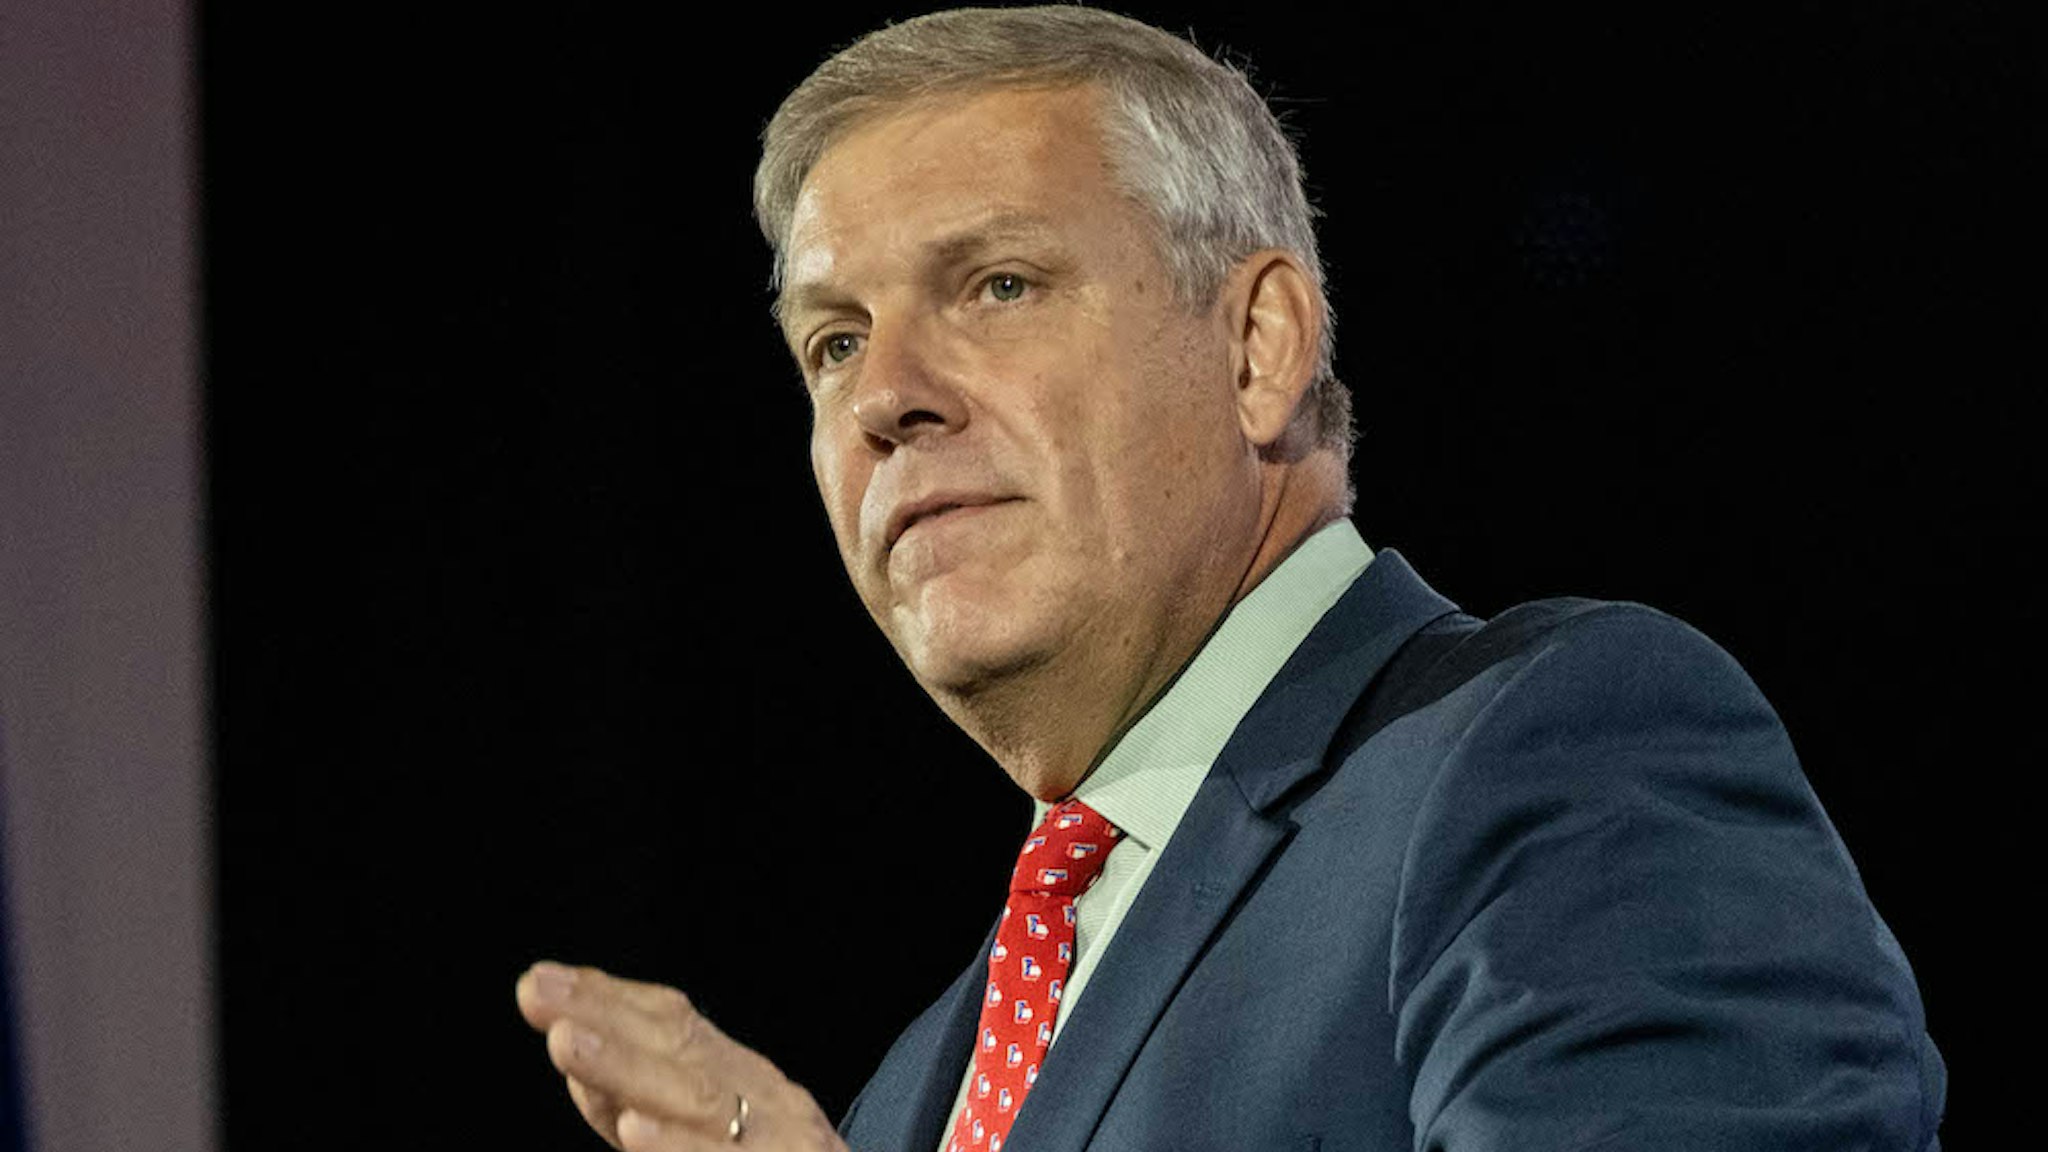 NASHVILLE, TN - JUNE 18: Republican Rep. Barry Loudermilk of Georgia speaks on the last day of the annual "Road To Majority Policy Conference" held by the Faith & Freedom Coalition at the at the Gaylord Opryland Resort & Convention Center June 18, 2022 in Nashville, Tennessee. Former President Donald Trump's appearance on the first day of the conference came on the heels of the third public hearing by the House committee investigating the attack on our U.S. Capitol. (Photo by Seth Herald/Getty Images)